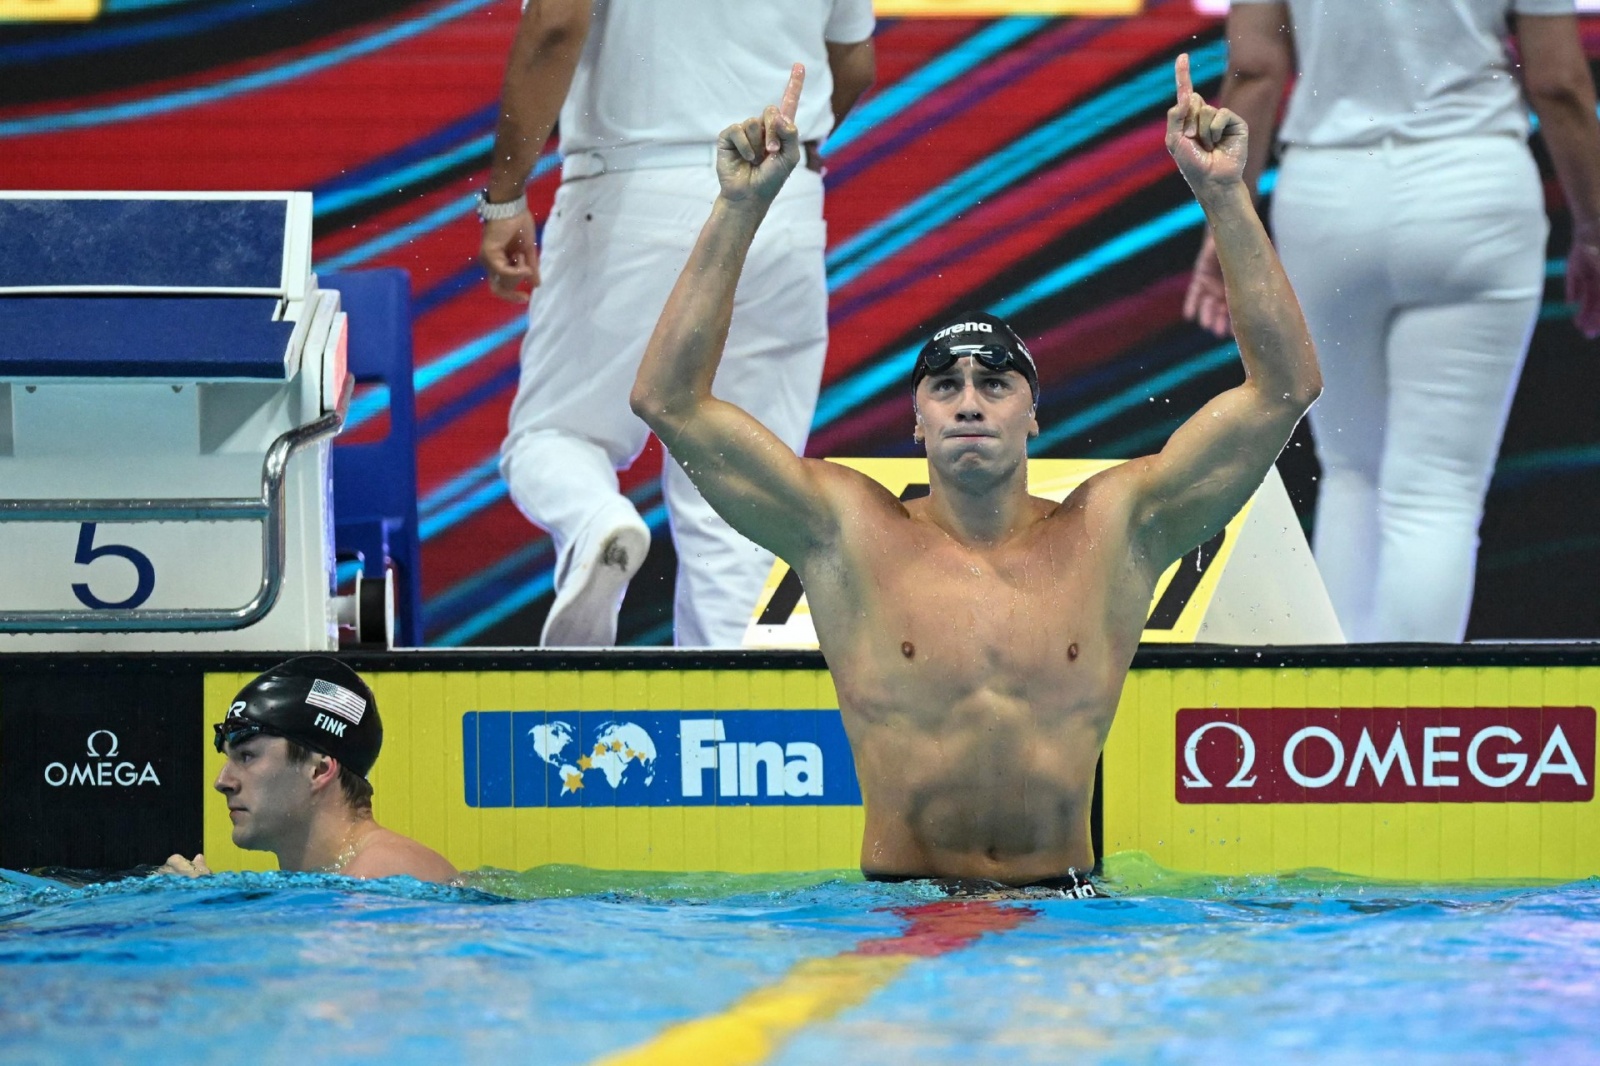 Italy's Nicolo Martinenghi celebrates taking gold in the men's 100m breaststroke finals the Budapest 2022 World Aquatics Championships at Duna Arena in Budapest on June 19, 2022. (Photo by Ferenc ISZA / AFP)